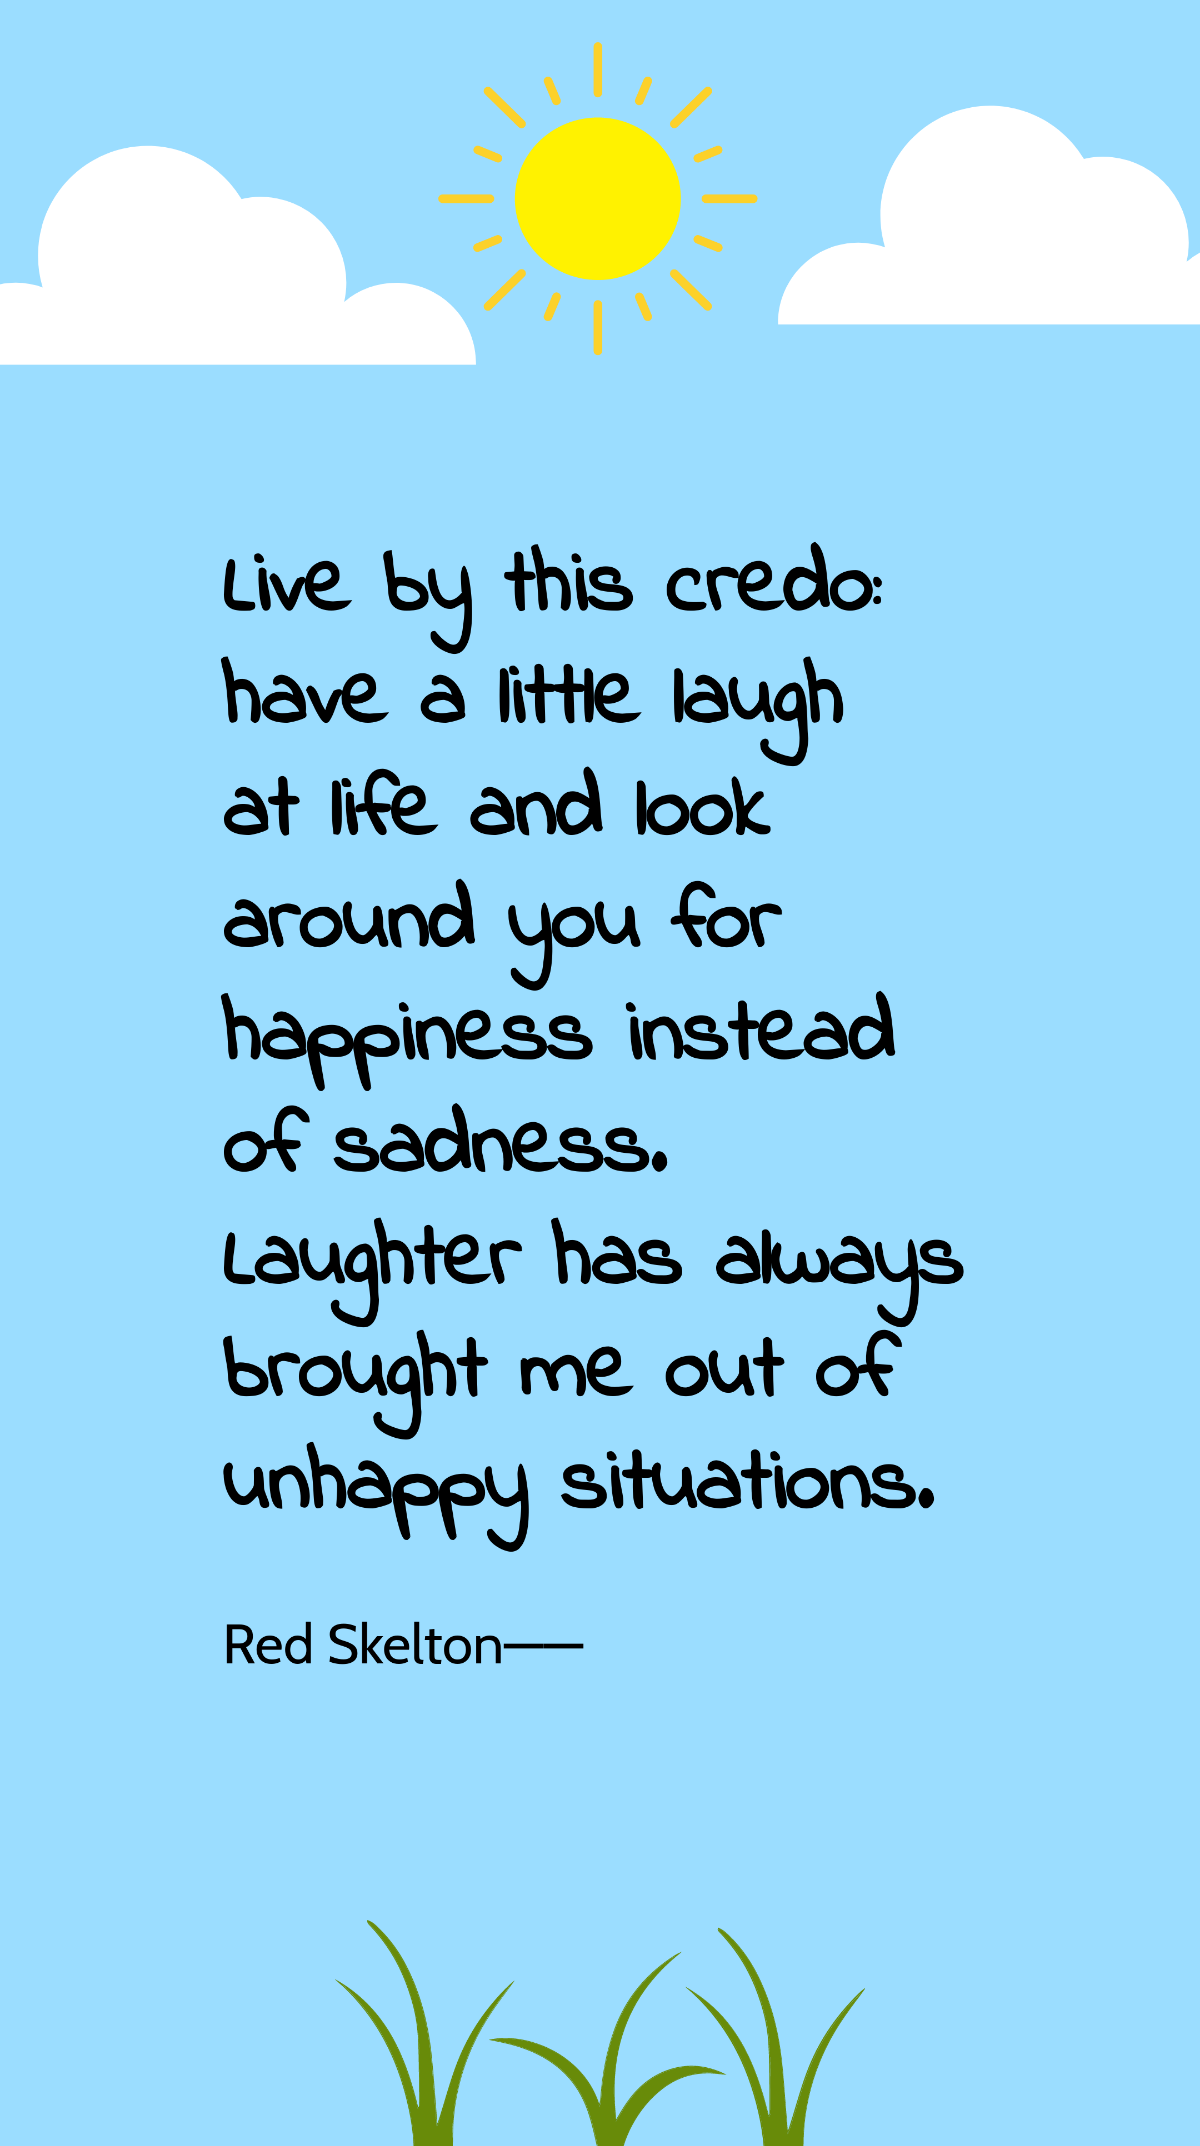 Red Skelton - Live by this credo: have a little laugh at life and look around you for happiness instead of sadness. Laughter has always brought me out of unhappy situations. Template